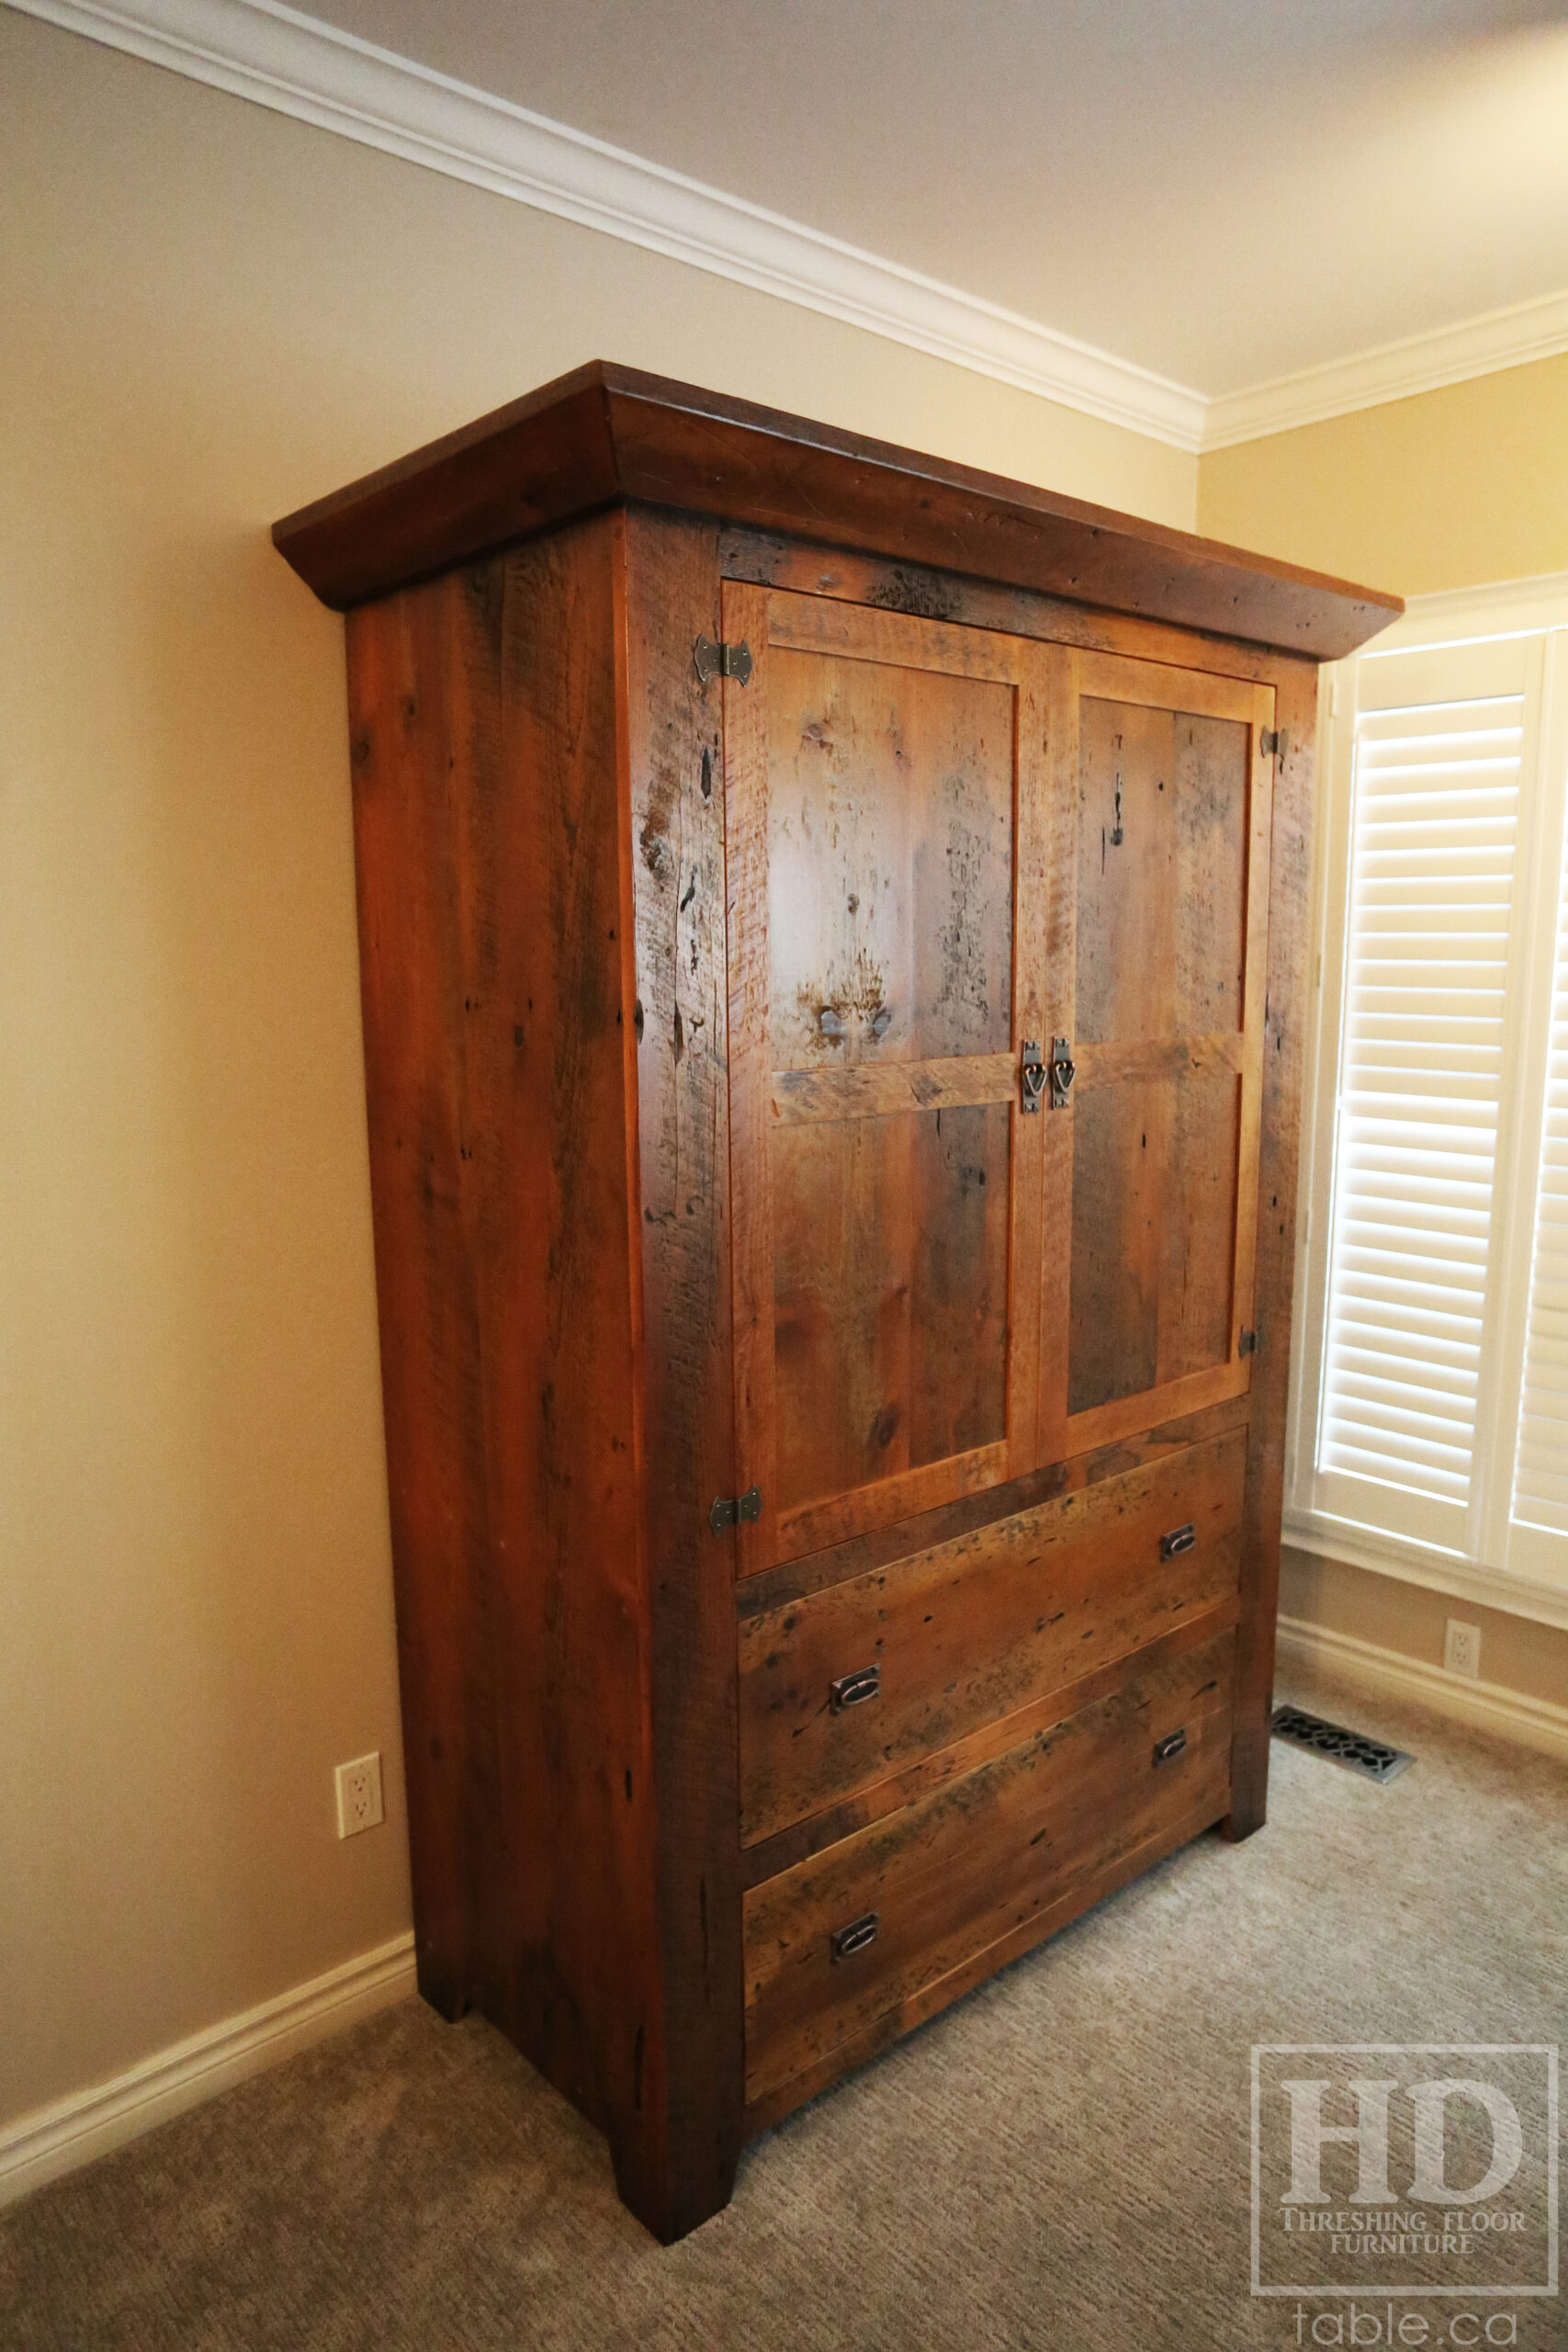 Reclaimed Ontario Barnwood Armoire - Old Growth Hemlock Threshing Floor & Grainery Board Construction - 2 Doors / 2 Drawers - Internal Hanging Option on top portion - Original edges & distressing maintained - Cast Brass Lee Valley Hardware - Crown Molding - Satin polyurethane finish - www.table.ca